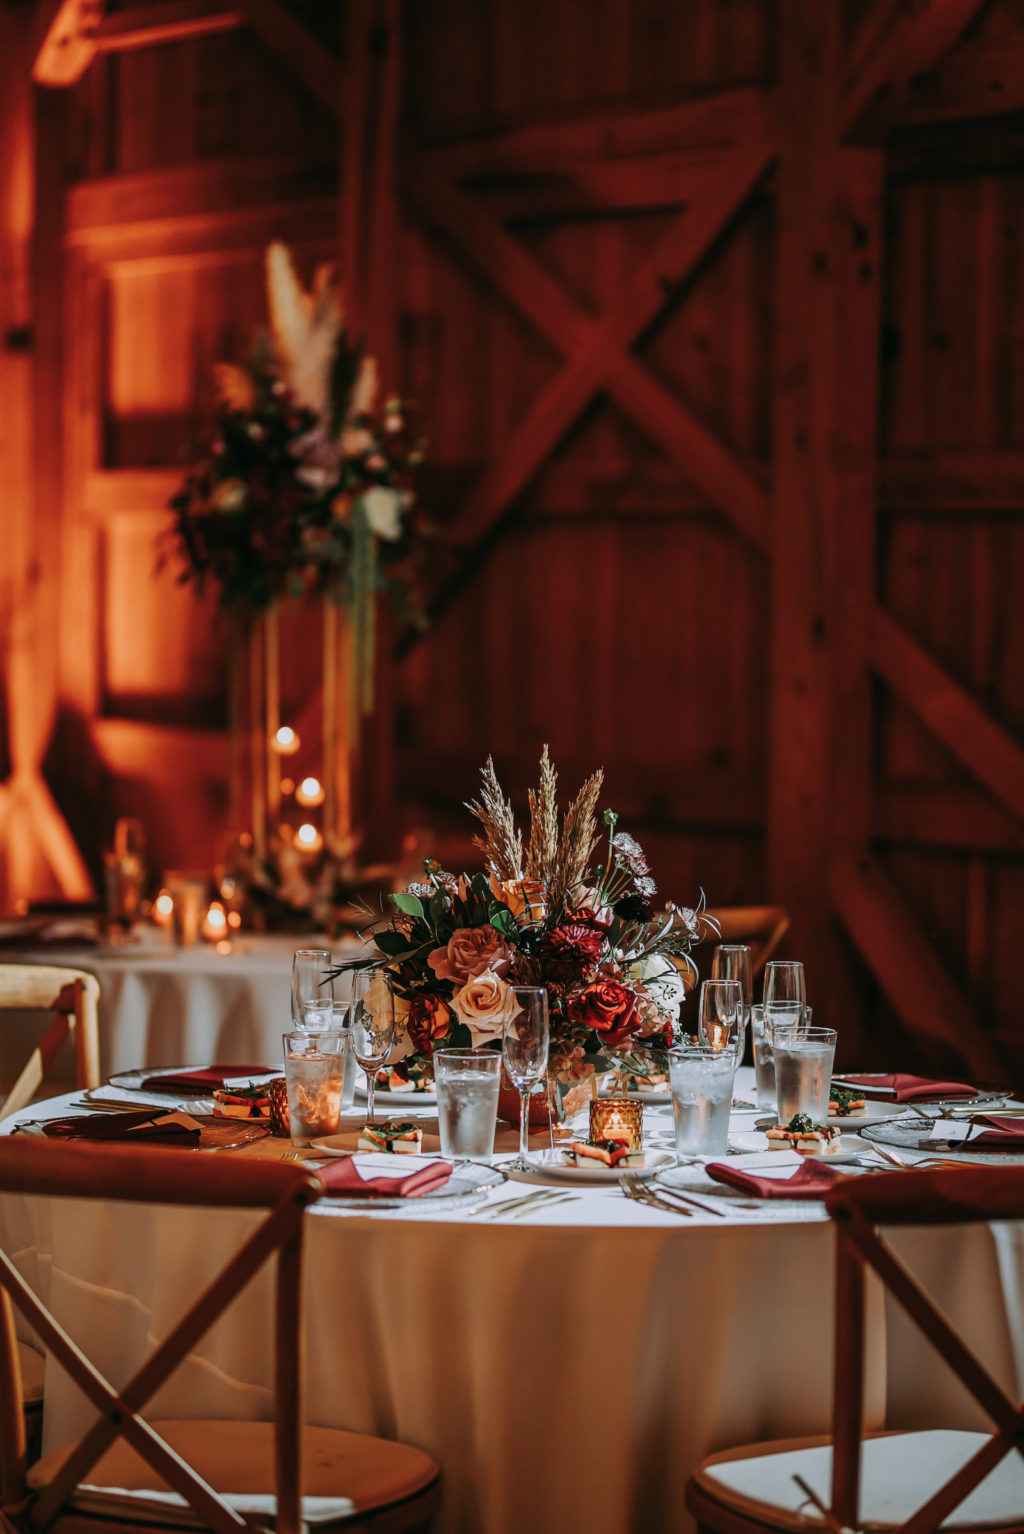 Rustic Barn Wedding Reception Decor, Round Table with Ivory Linen, Wooden Cross Back Chairs, Low Floral Centerpiece with Orange and Burgundy Roses, Pampas Grass